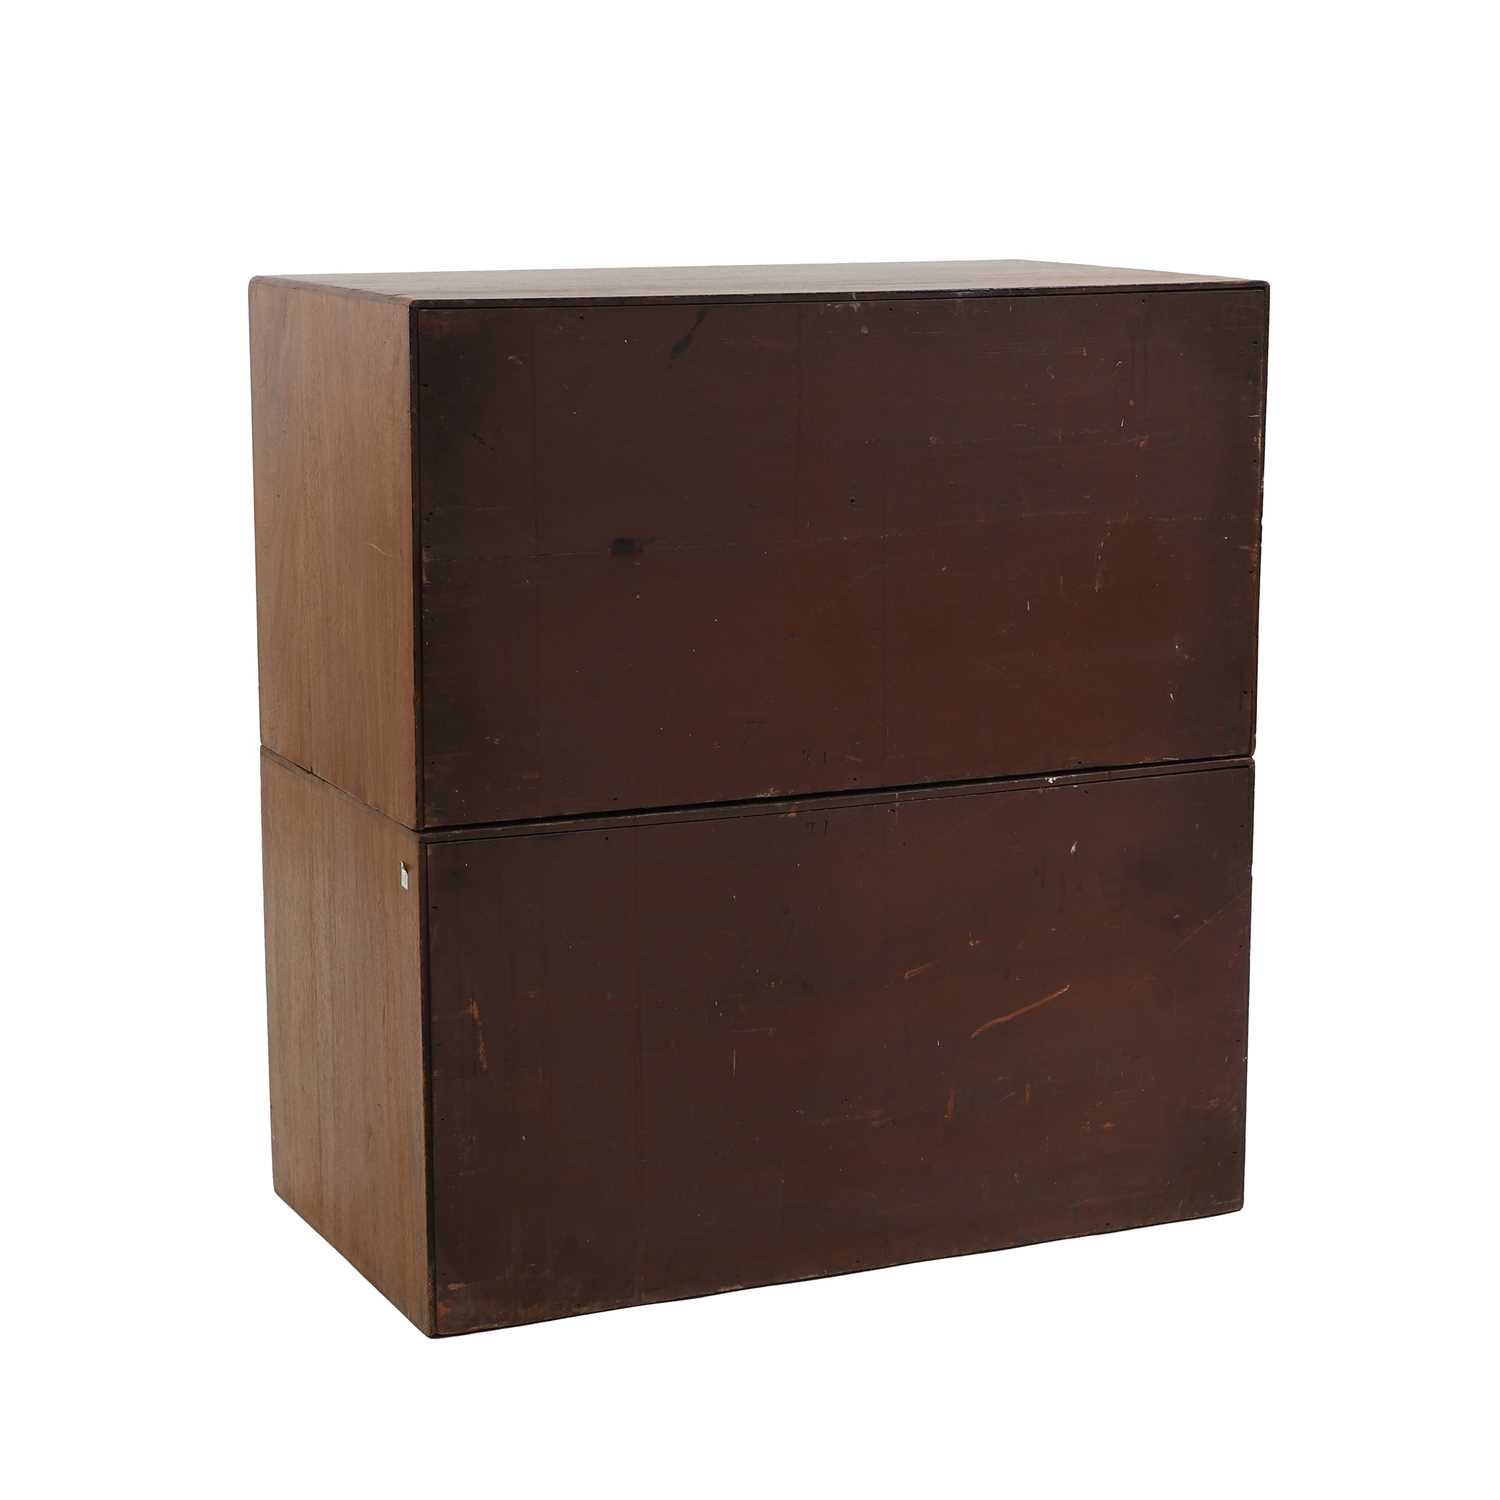 A teak campaign chest - Image 3 of 4